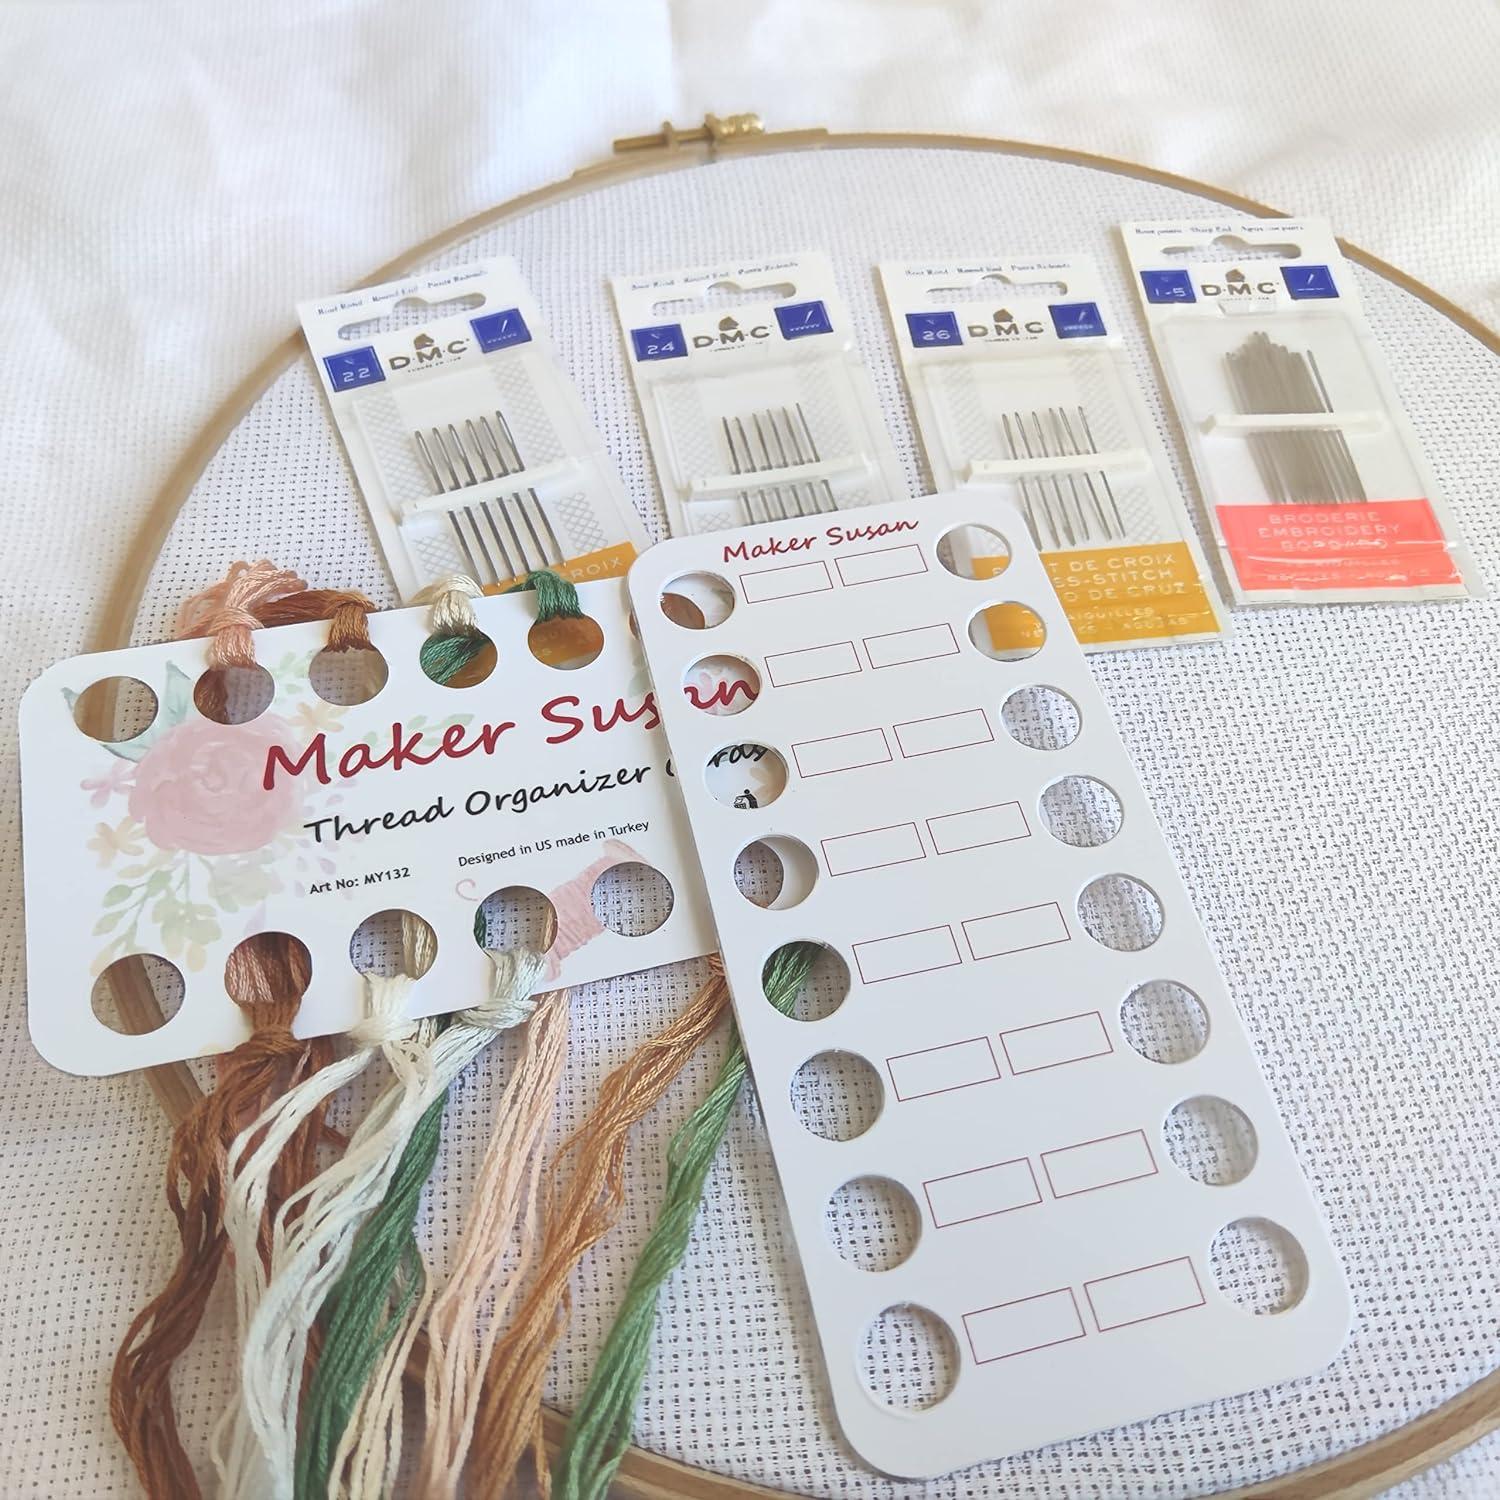 Maker Susan 10 Pack Embroidery Thread Organizer Cards Embroidery